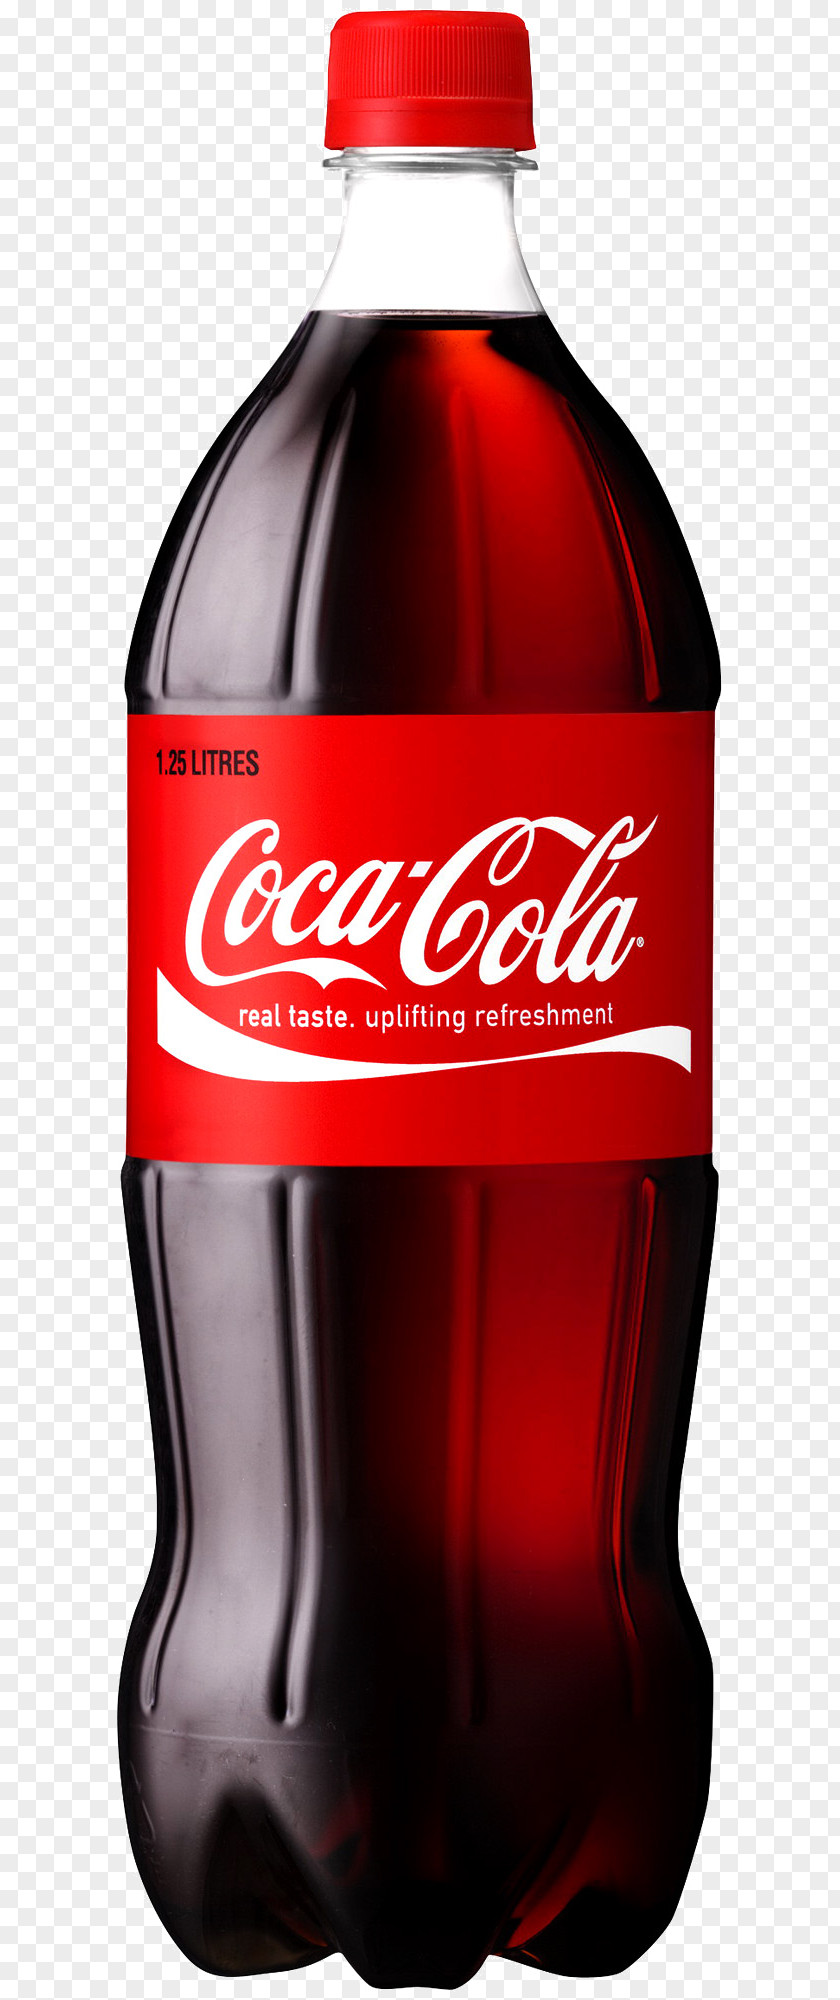 Coca Cola Bottle Image World Of Coca-Cola Soft Drink The Company PNG